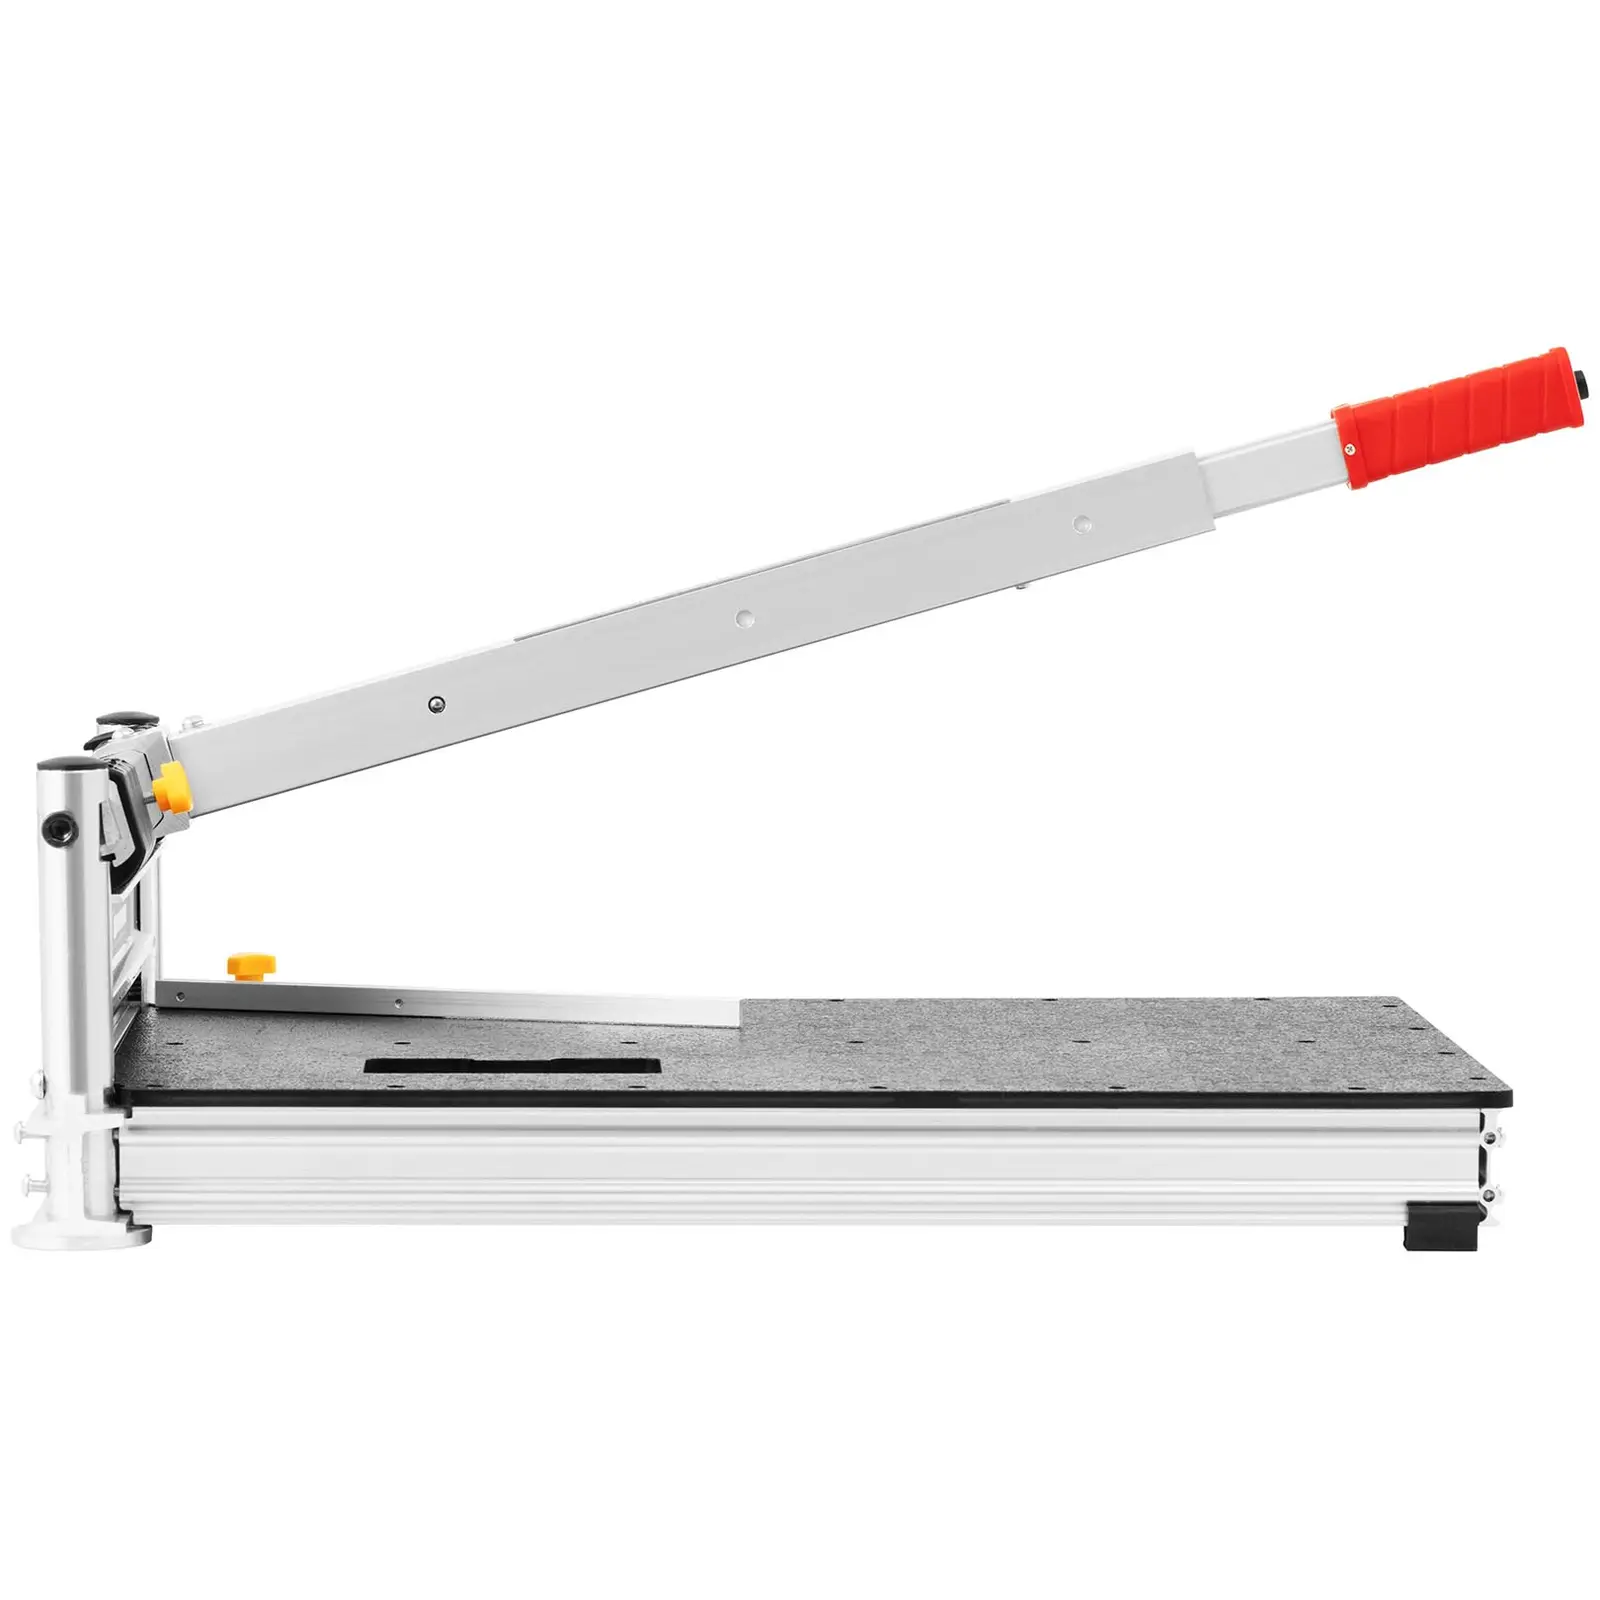 Laminate cutter - manual - thickness: 16mm - angle gauge - 330mm